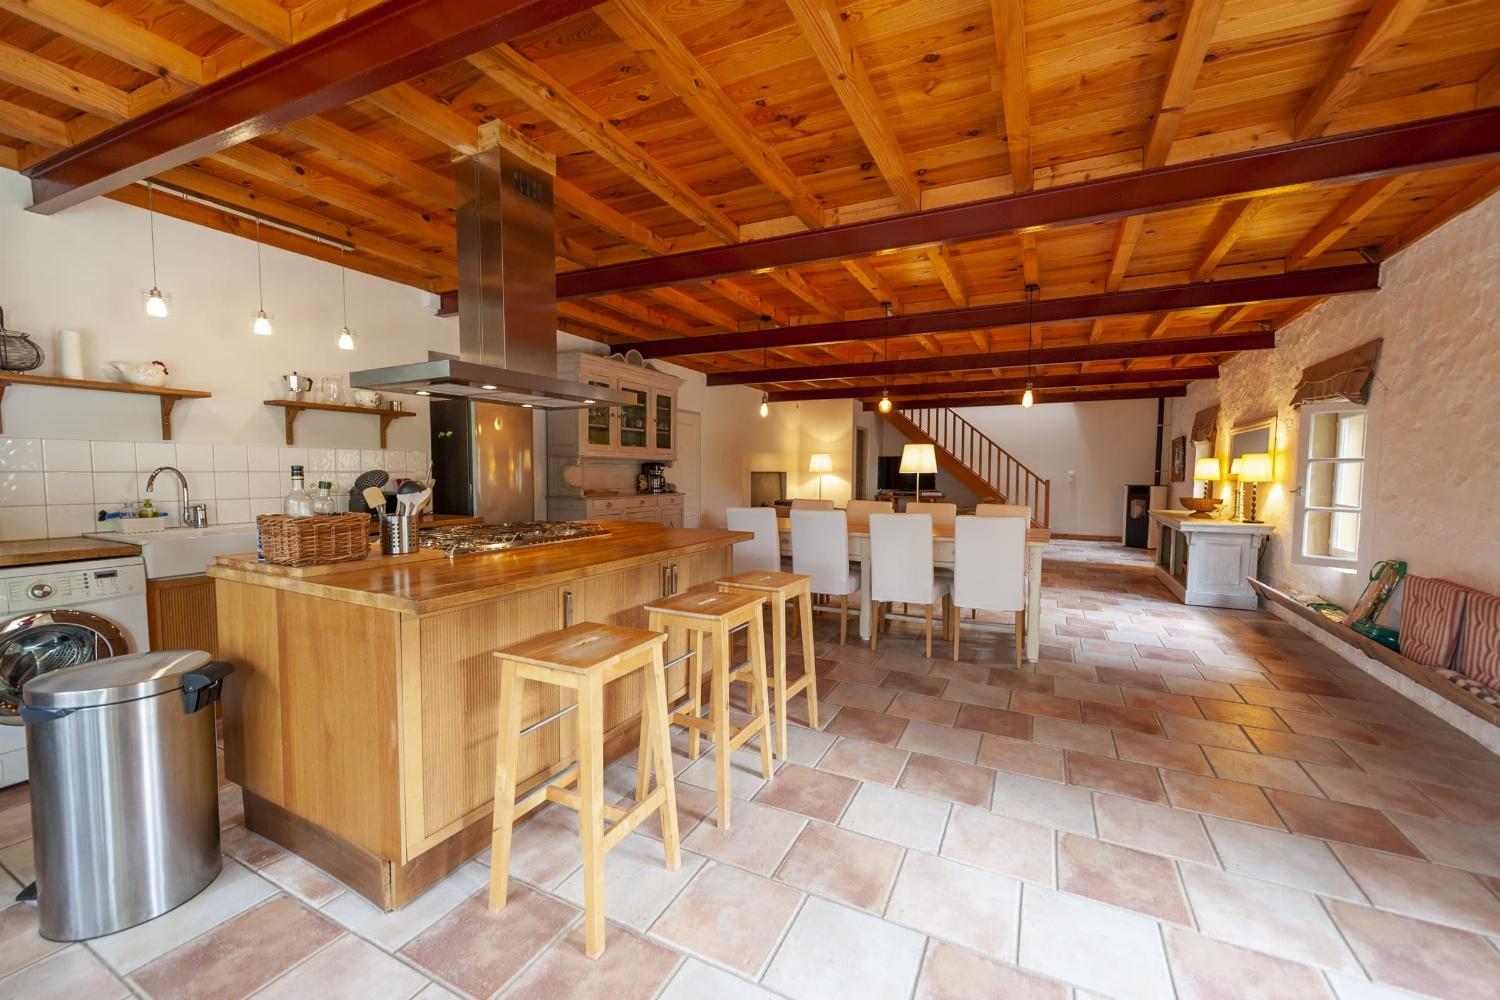 Kitchen | Holiday accommodation in South of France